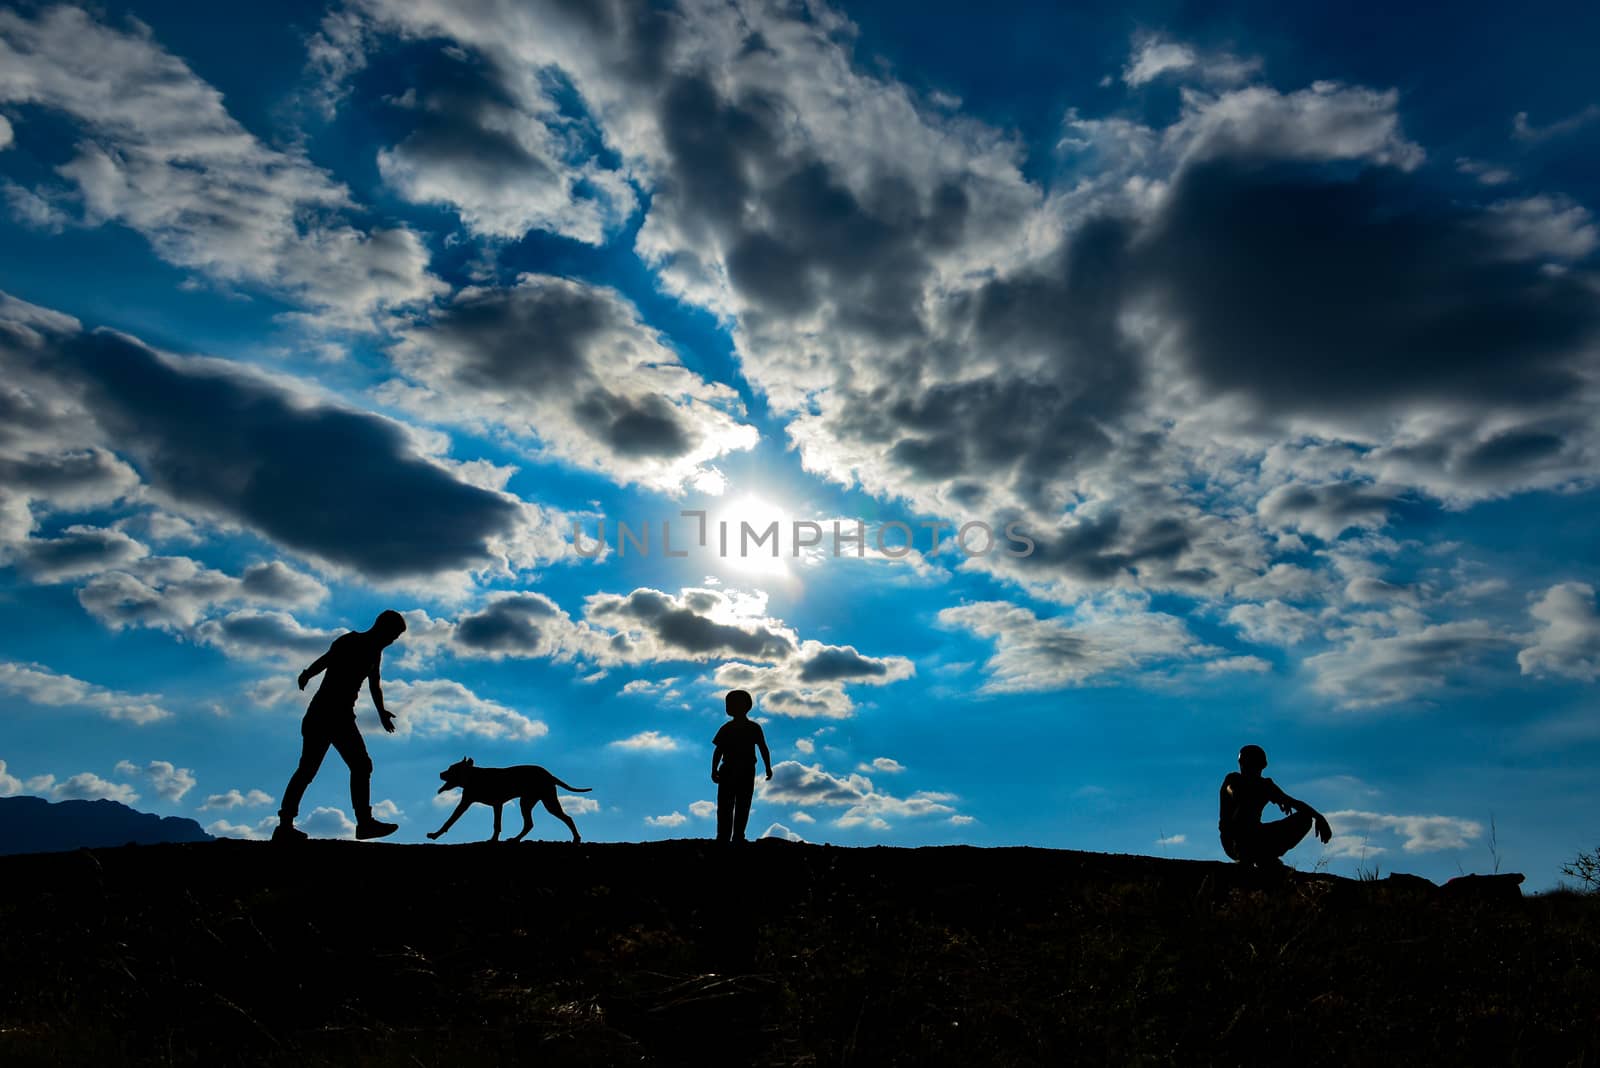 games with your dog in nature by crazymedia007